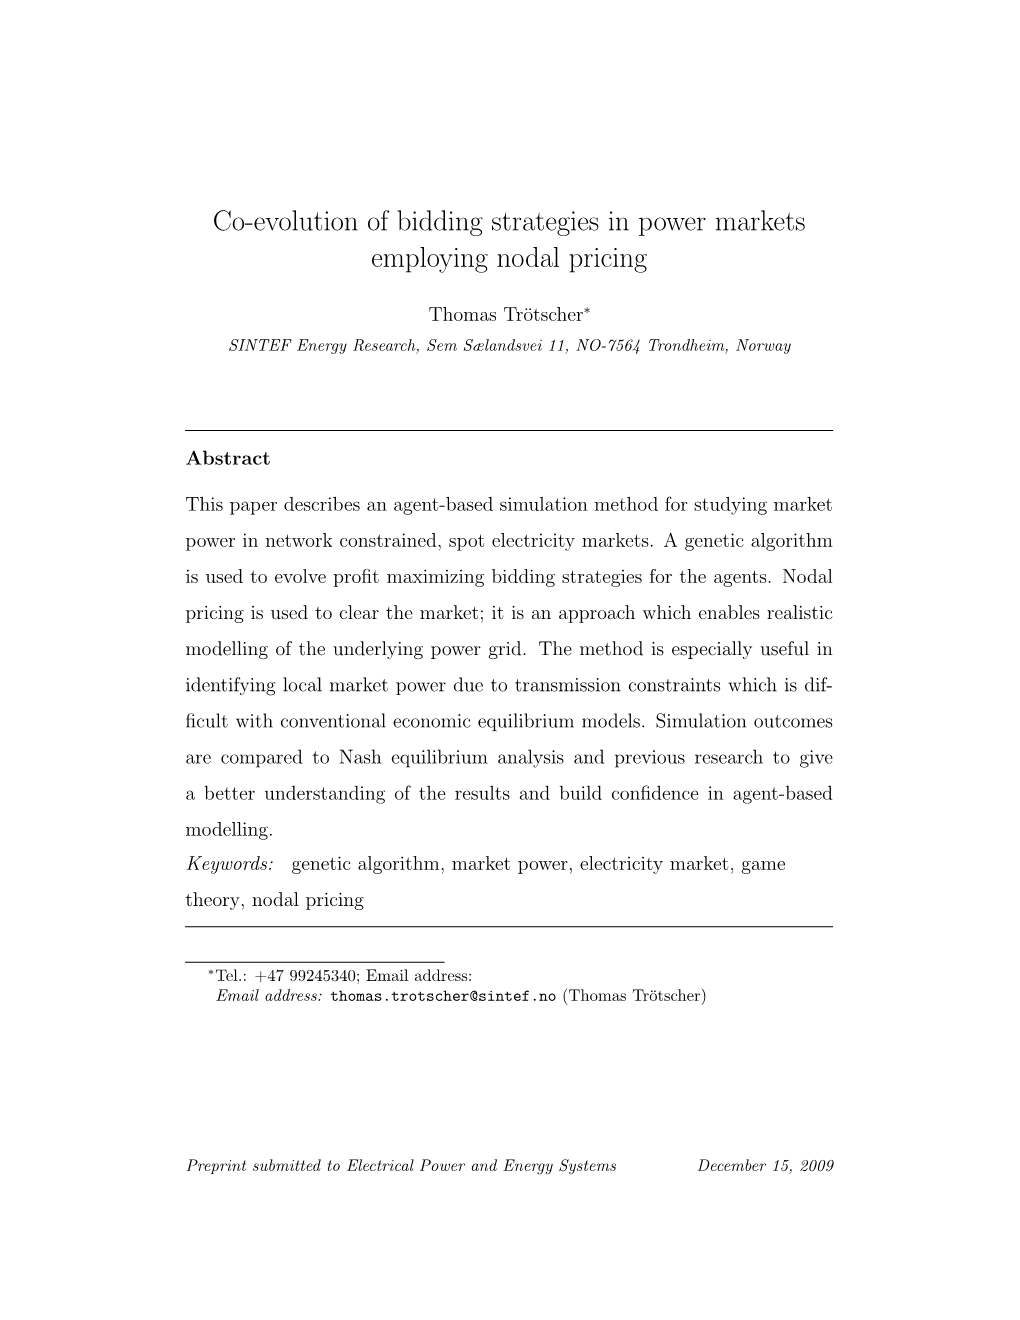 Co-Evolution of Bidding Strategies in Power Markets Employing Nodal Pricing